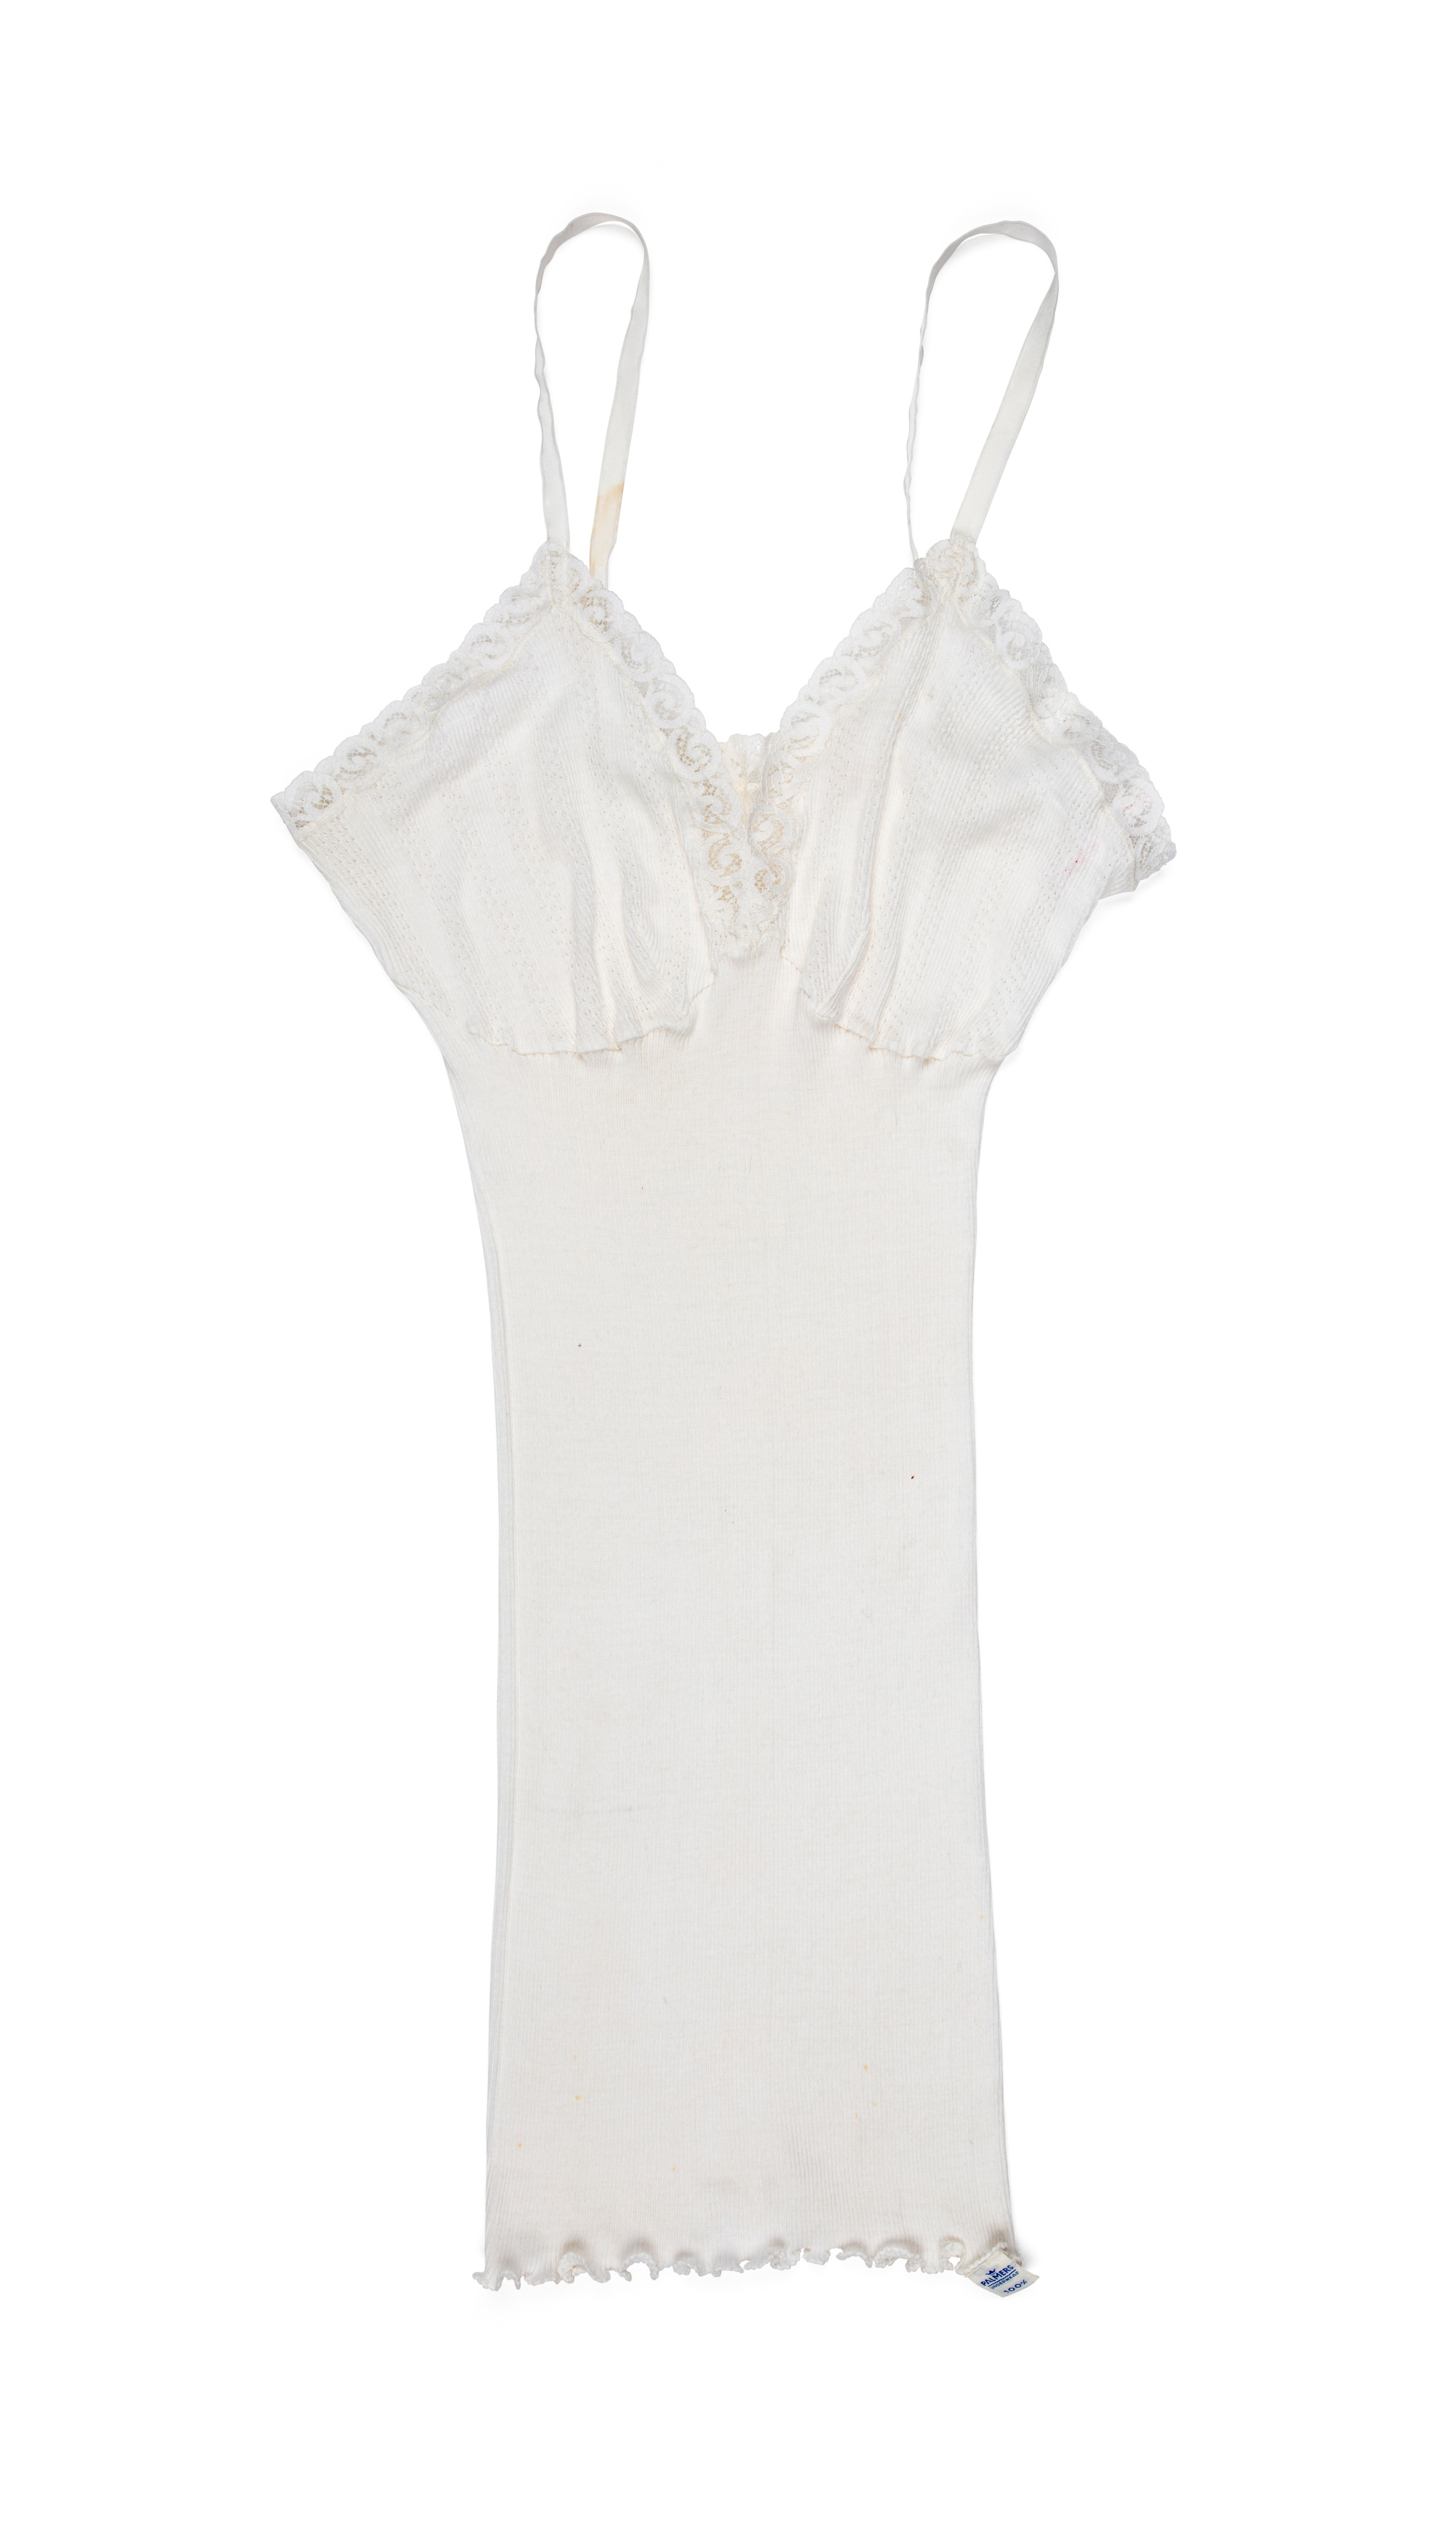 Camisole by Palmers owned by Margaret 'Babby' Reid